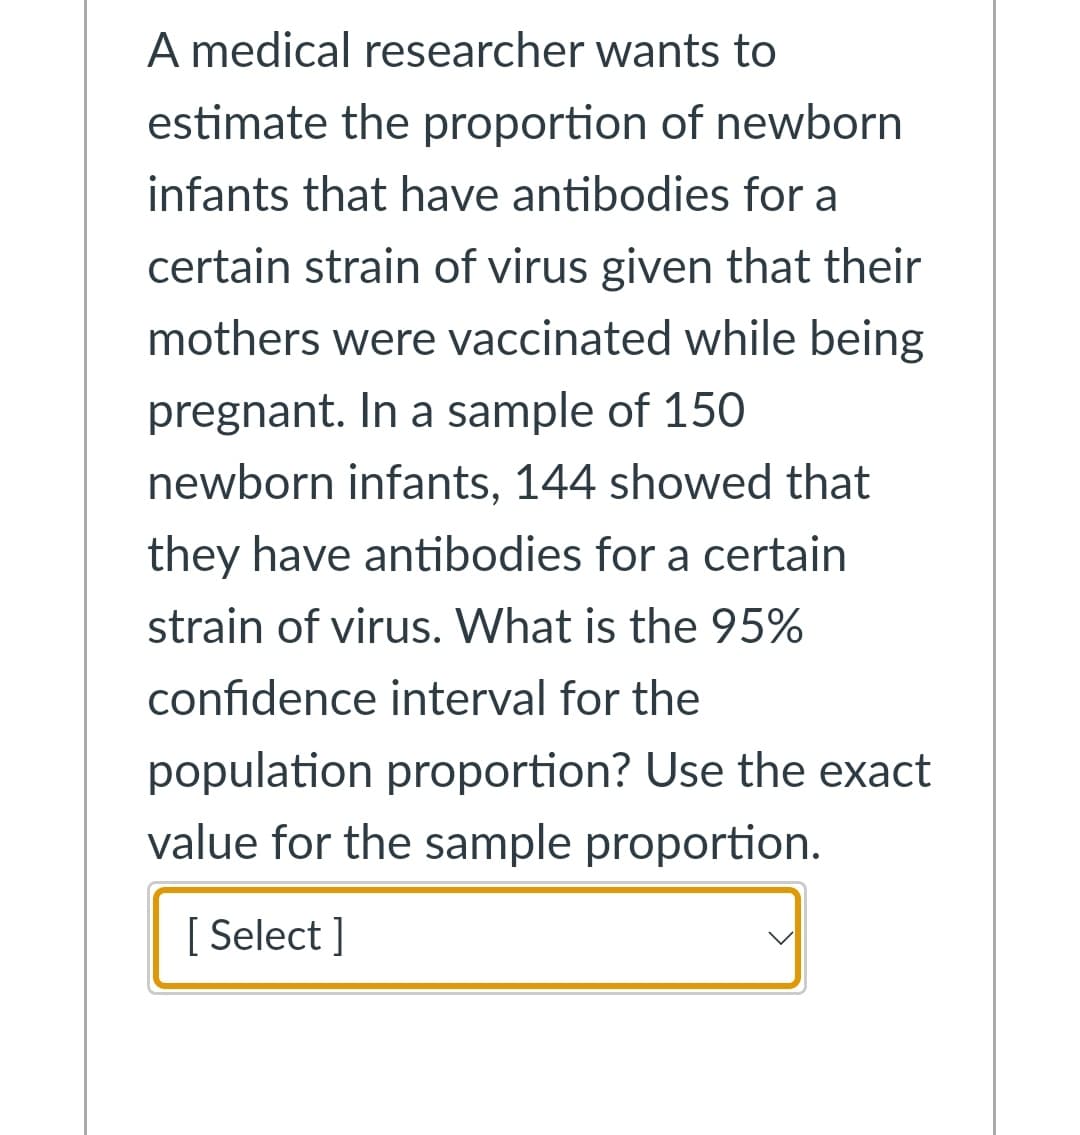 A medical researcher wants to
estimate the proportion of newborn
infants that have antibodies for a
certain strain of virus given that their
mothers were vaccinated while being
pregnant. In a sample of 150
newborn infants, 144 showed that
they have antibodies for a certain
strain of virus. What is the 95%
confidence interval for the
population proportion? Use the exact
value for the sample proportion.
[ Select ]
